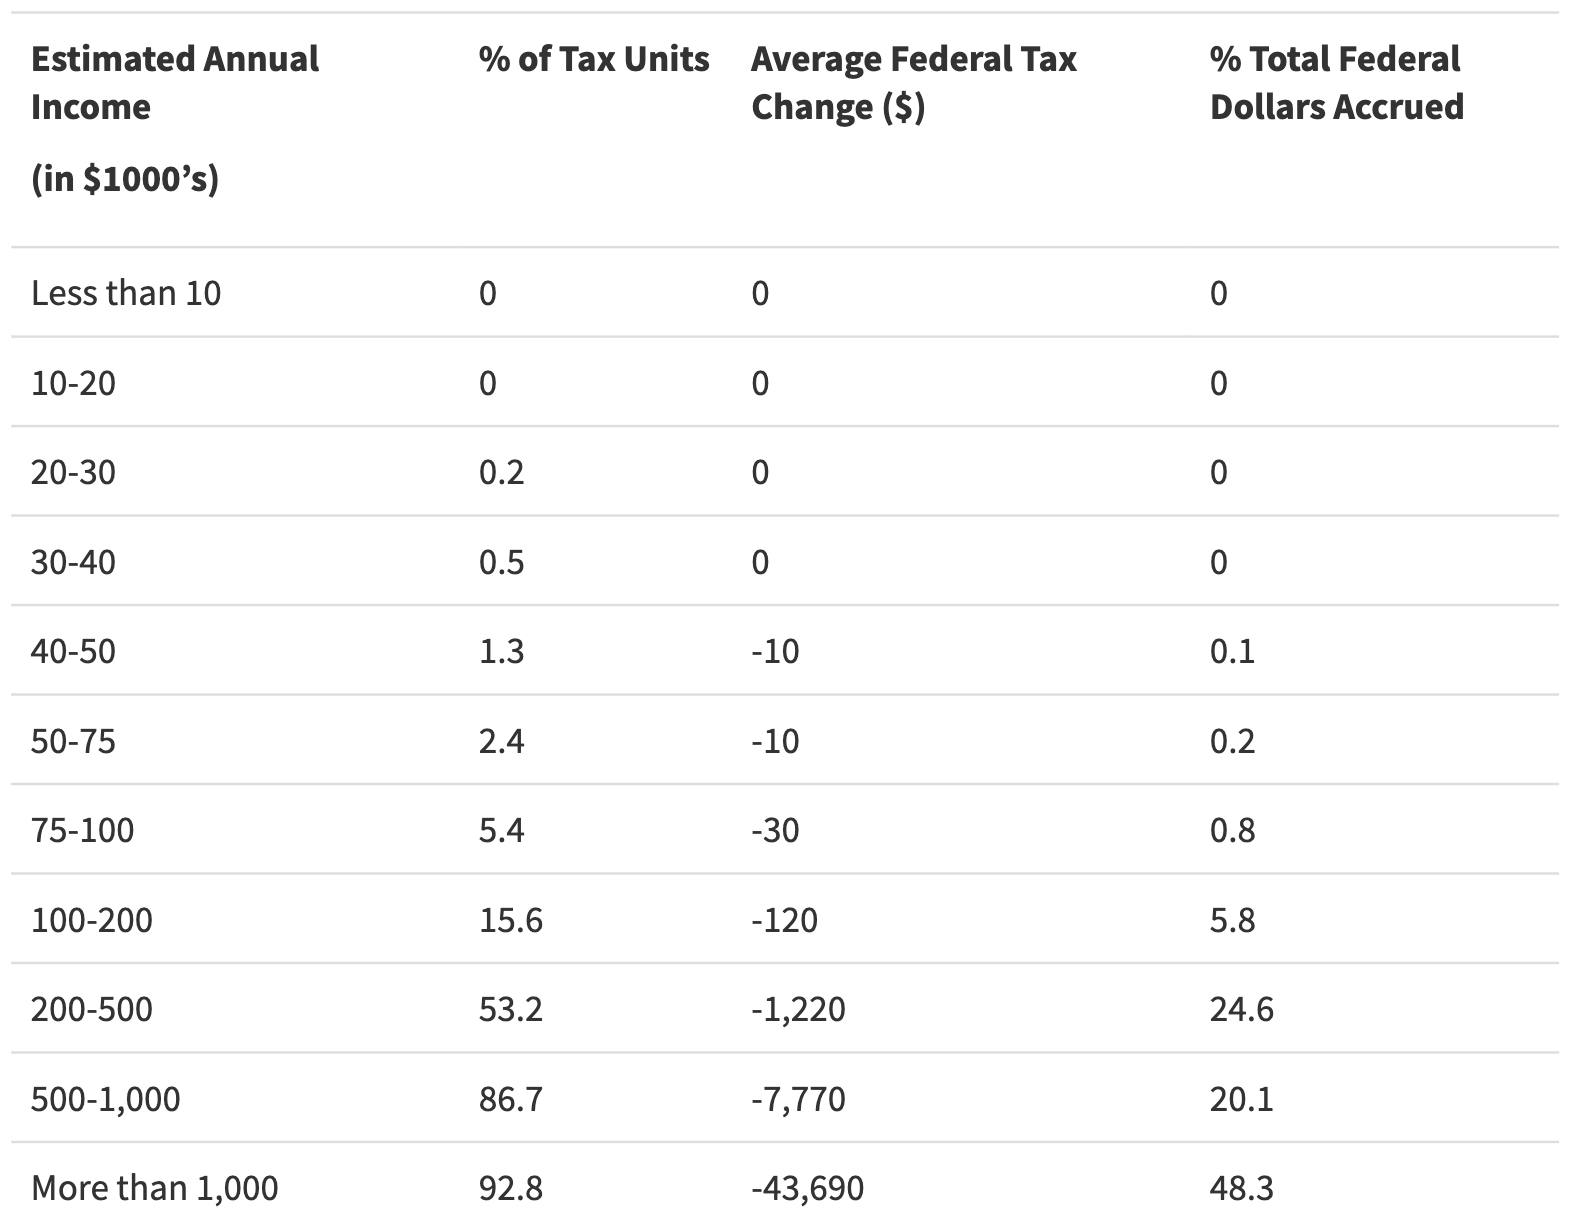 This table compares percentage of tax units, average federal tax change, and percentage of total federal dollars accrued by annual income.